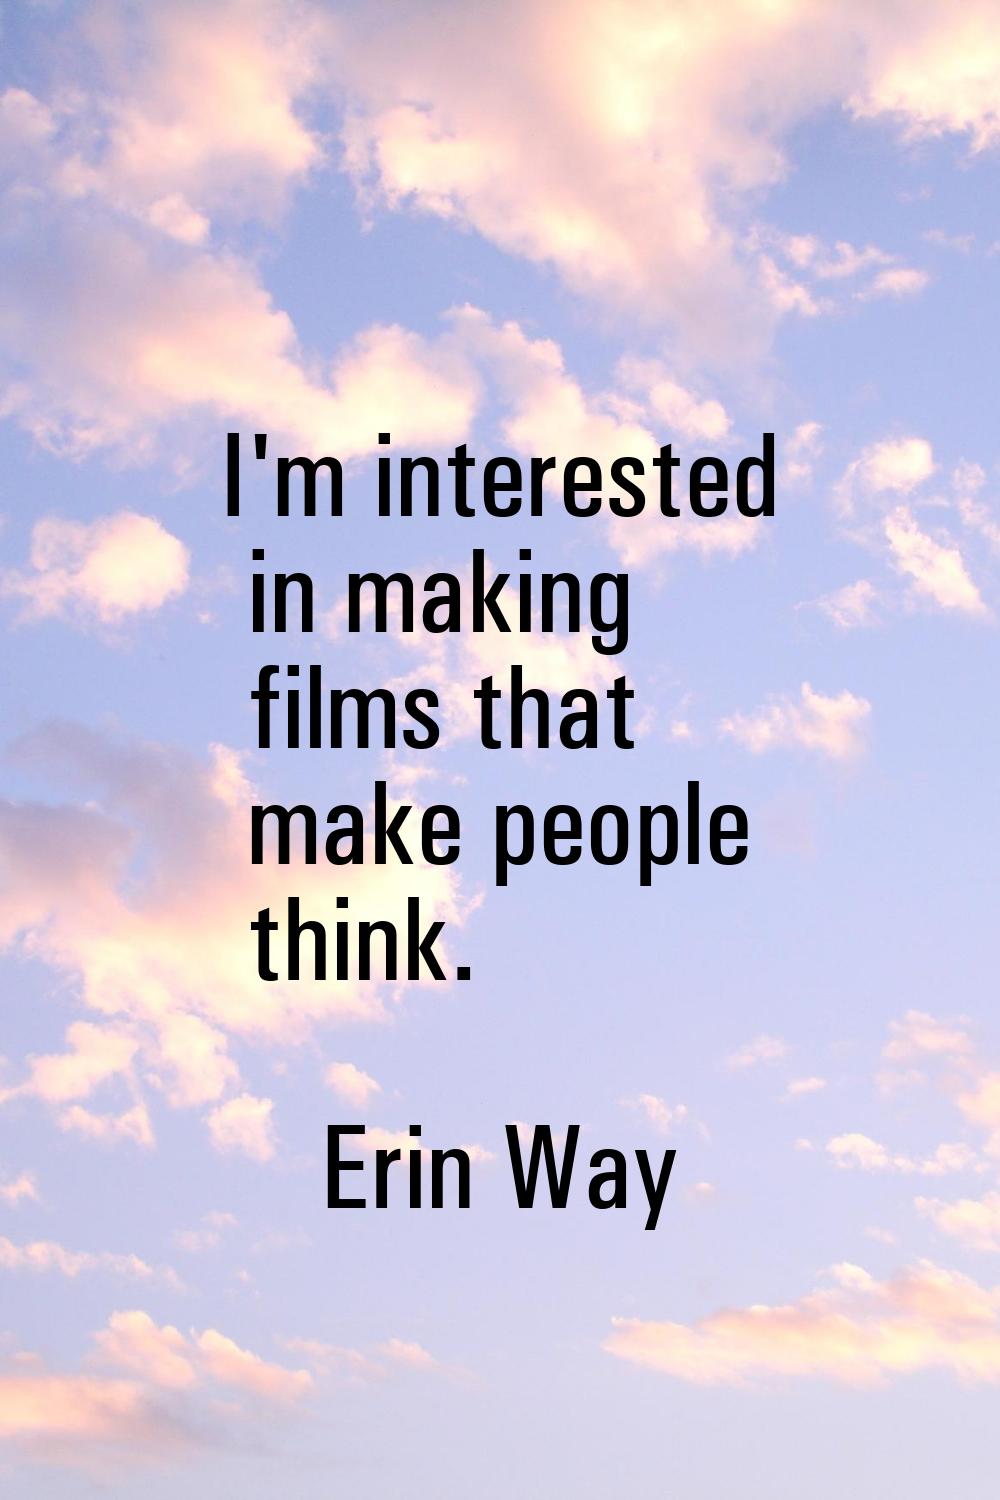 I'm interested in making films that make people think.